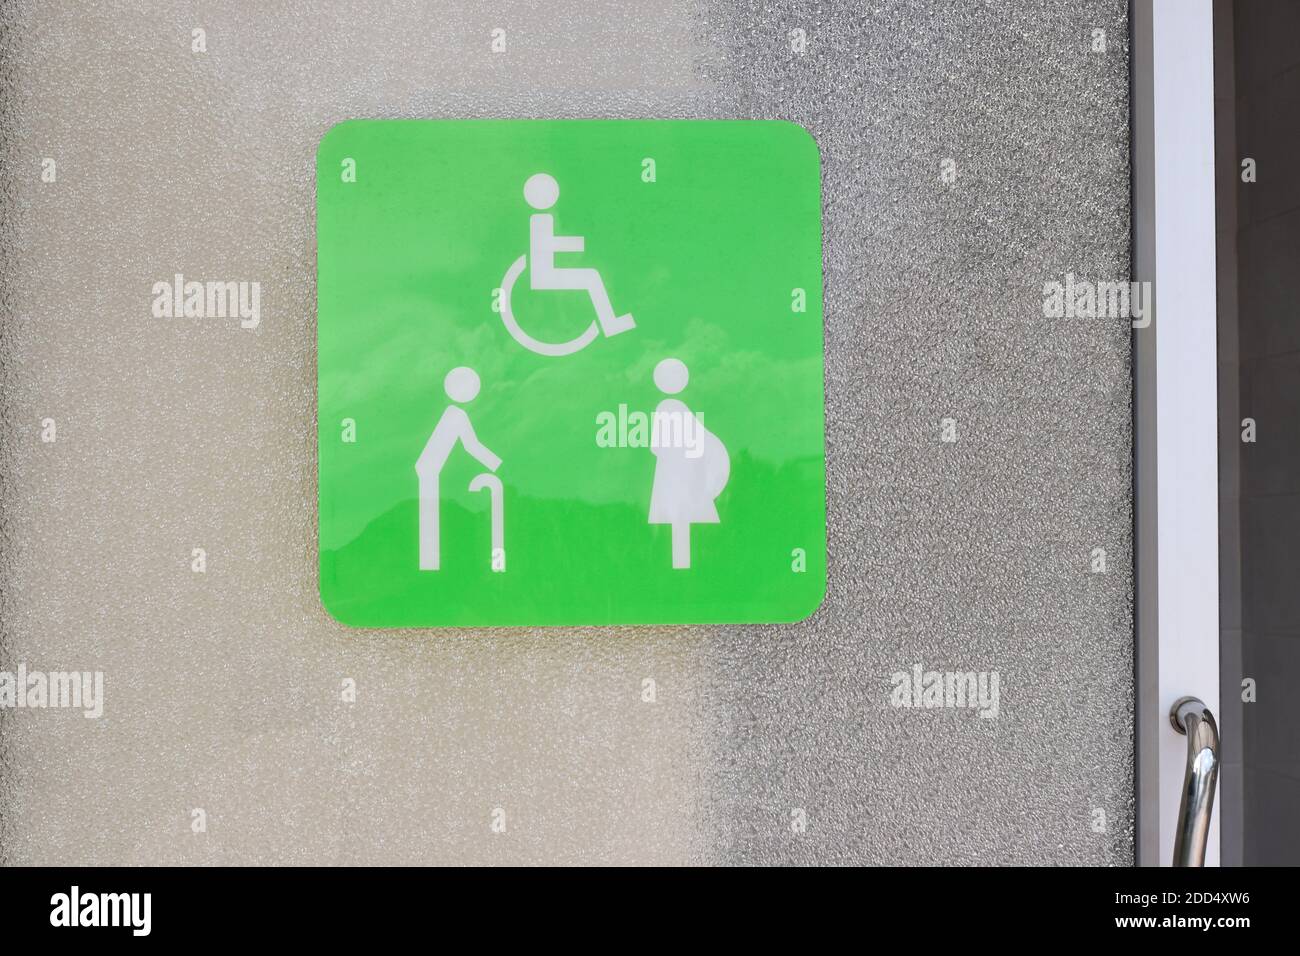 Symbol showing toilet for pregnant women, elderly and disabled in the public. Stock Photo